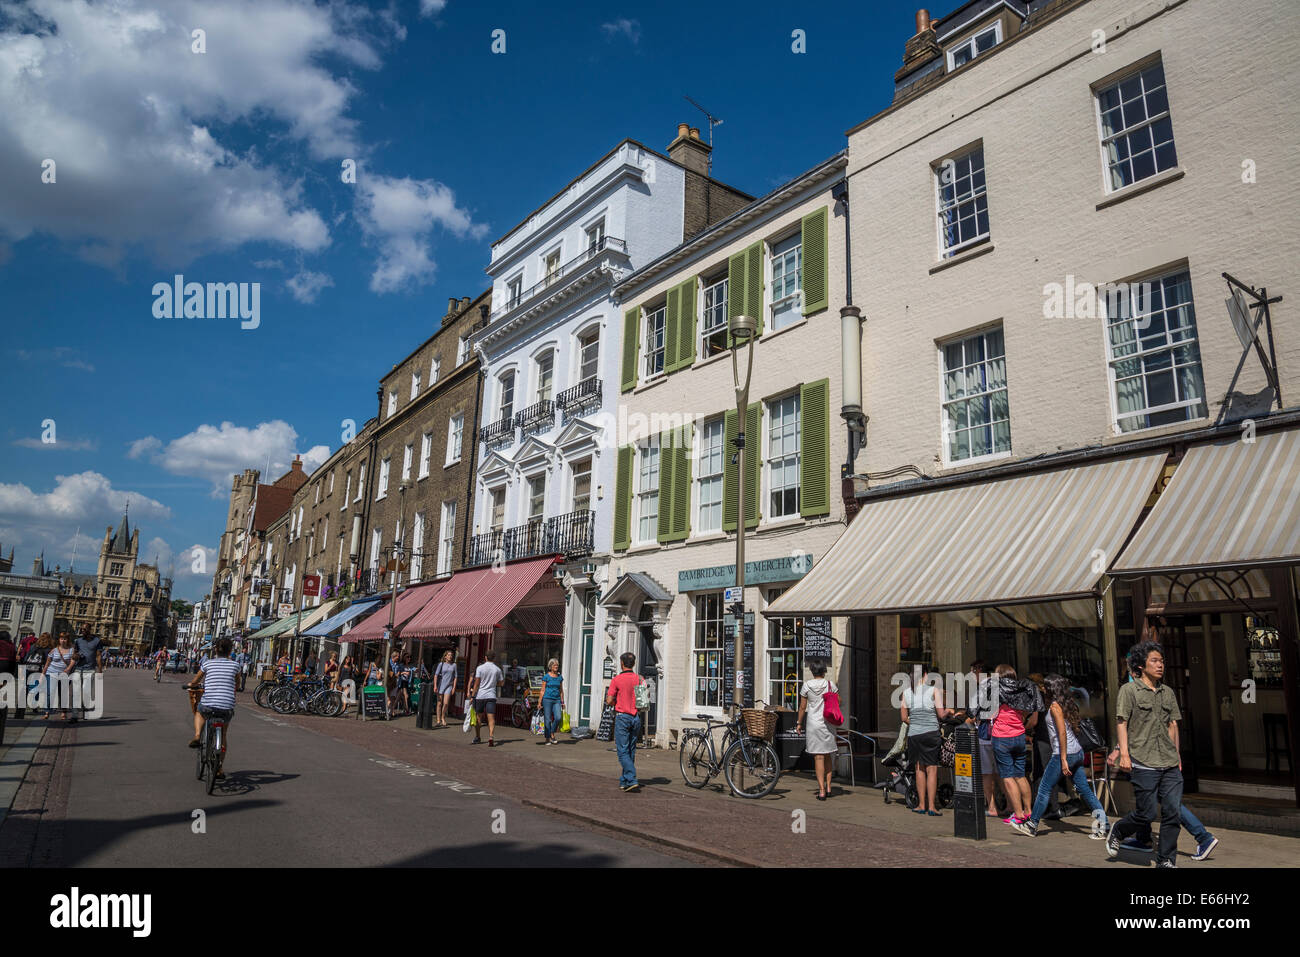 Row of houses and shops in King's Parade Street, Cambridge, England, UK Stock Photo